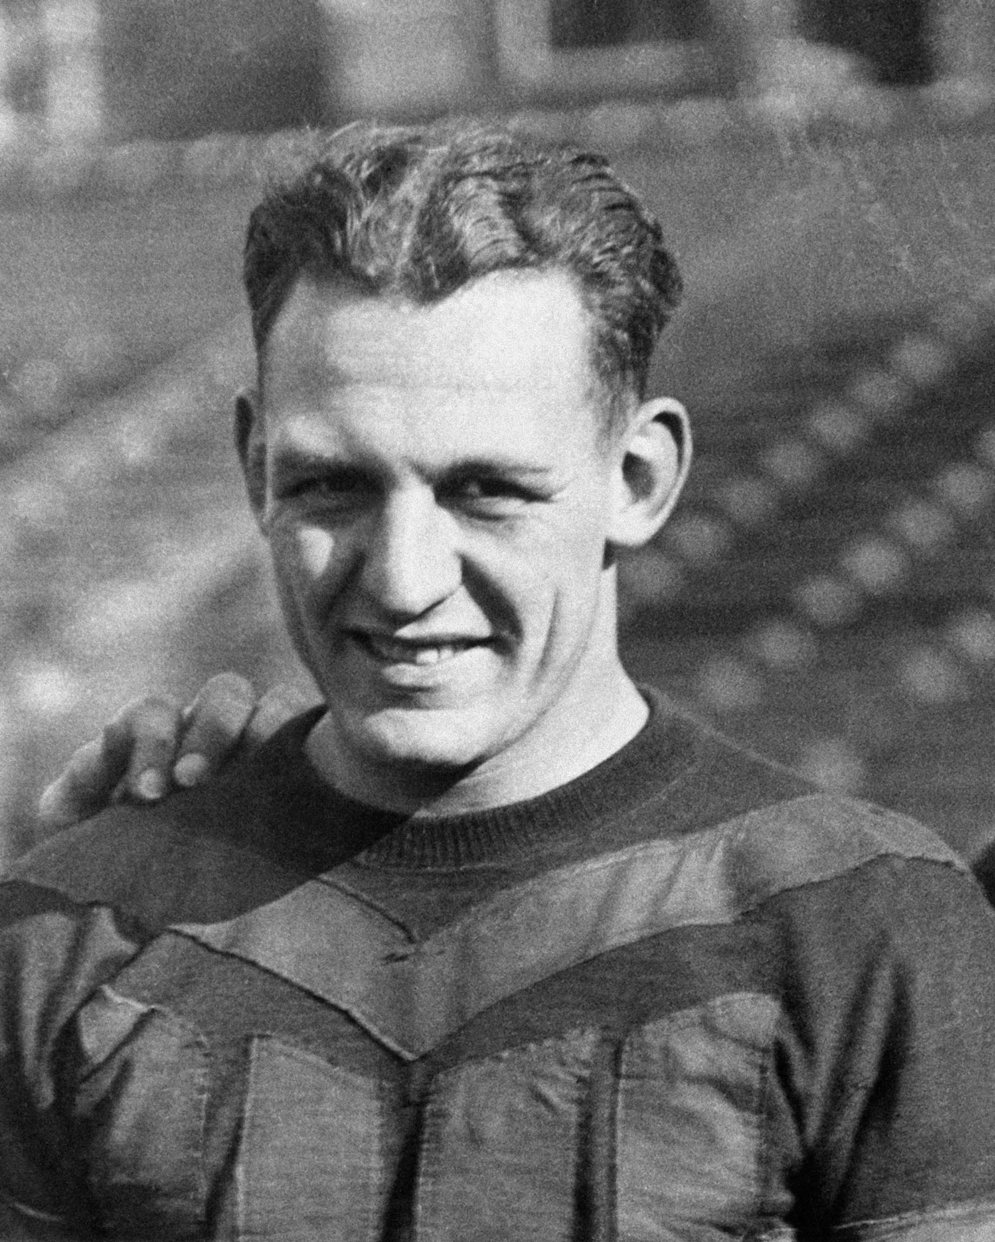 Harold “Red” Grange, a superstar at the University of Illinois, elevated the NFL’s prestige and popularity — and negotiated a healthy cut of the profit — when he signed up for a wildly popular barnstorming tour with the Chicago Bears in 1925. (AP Photo)